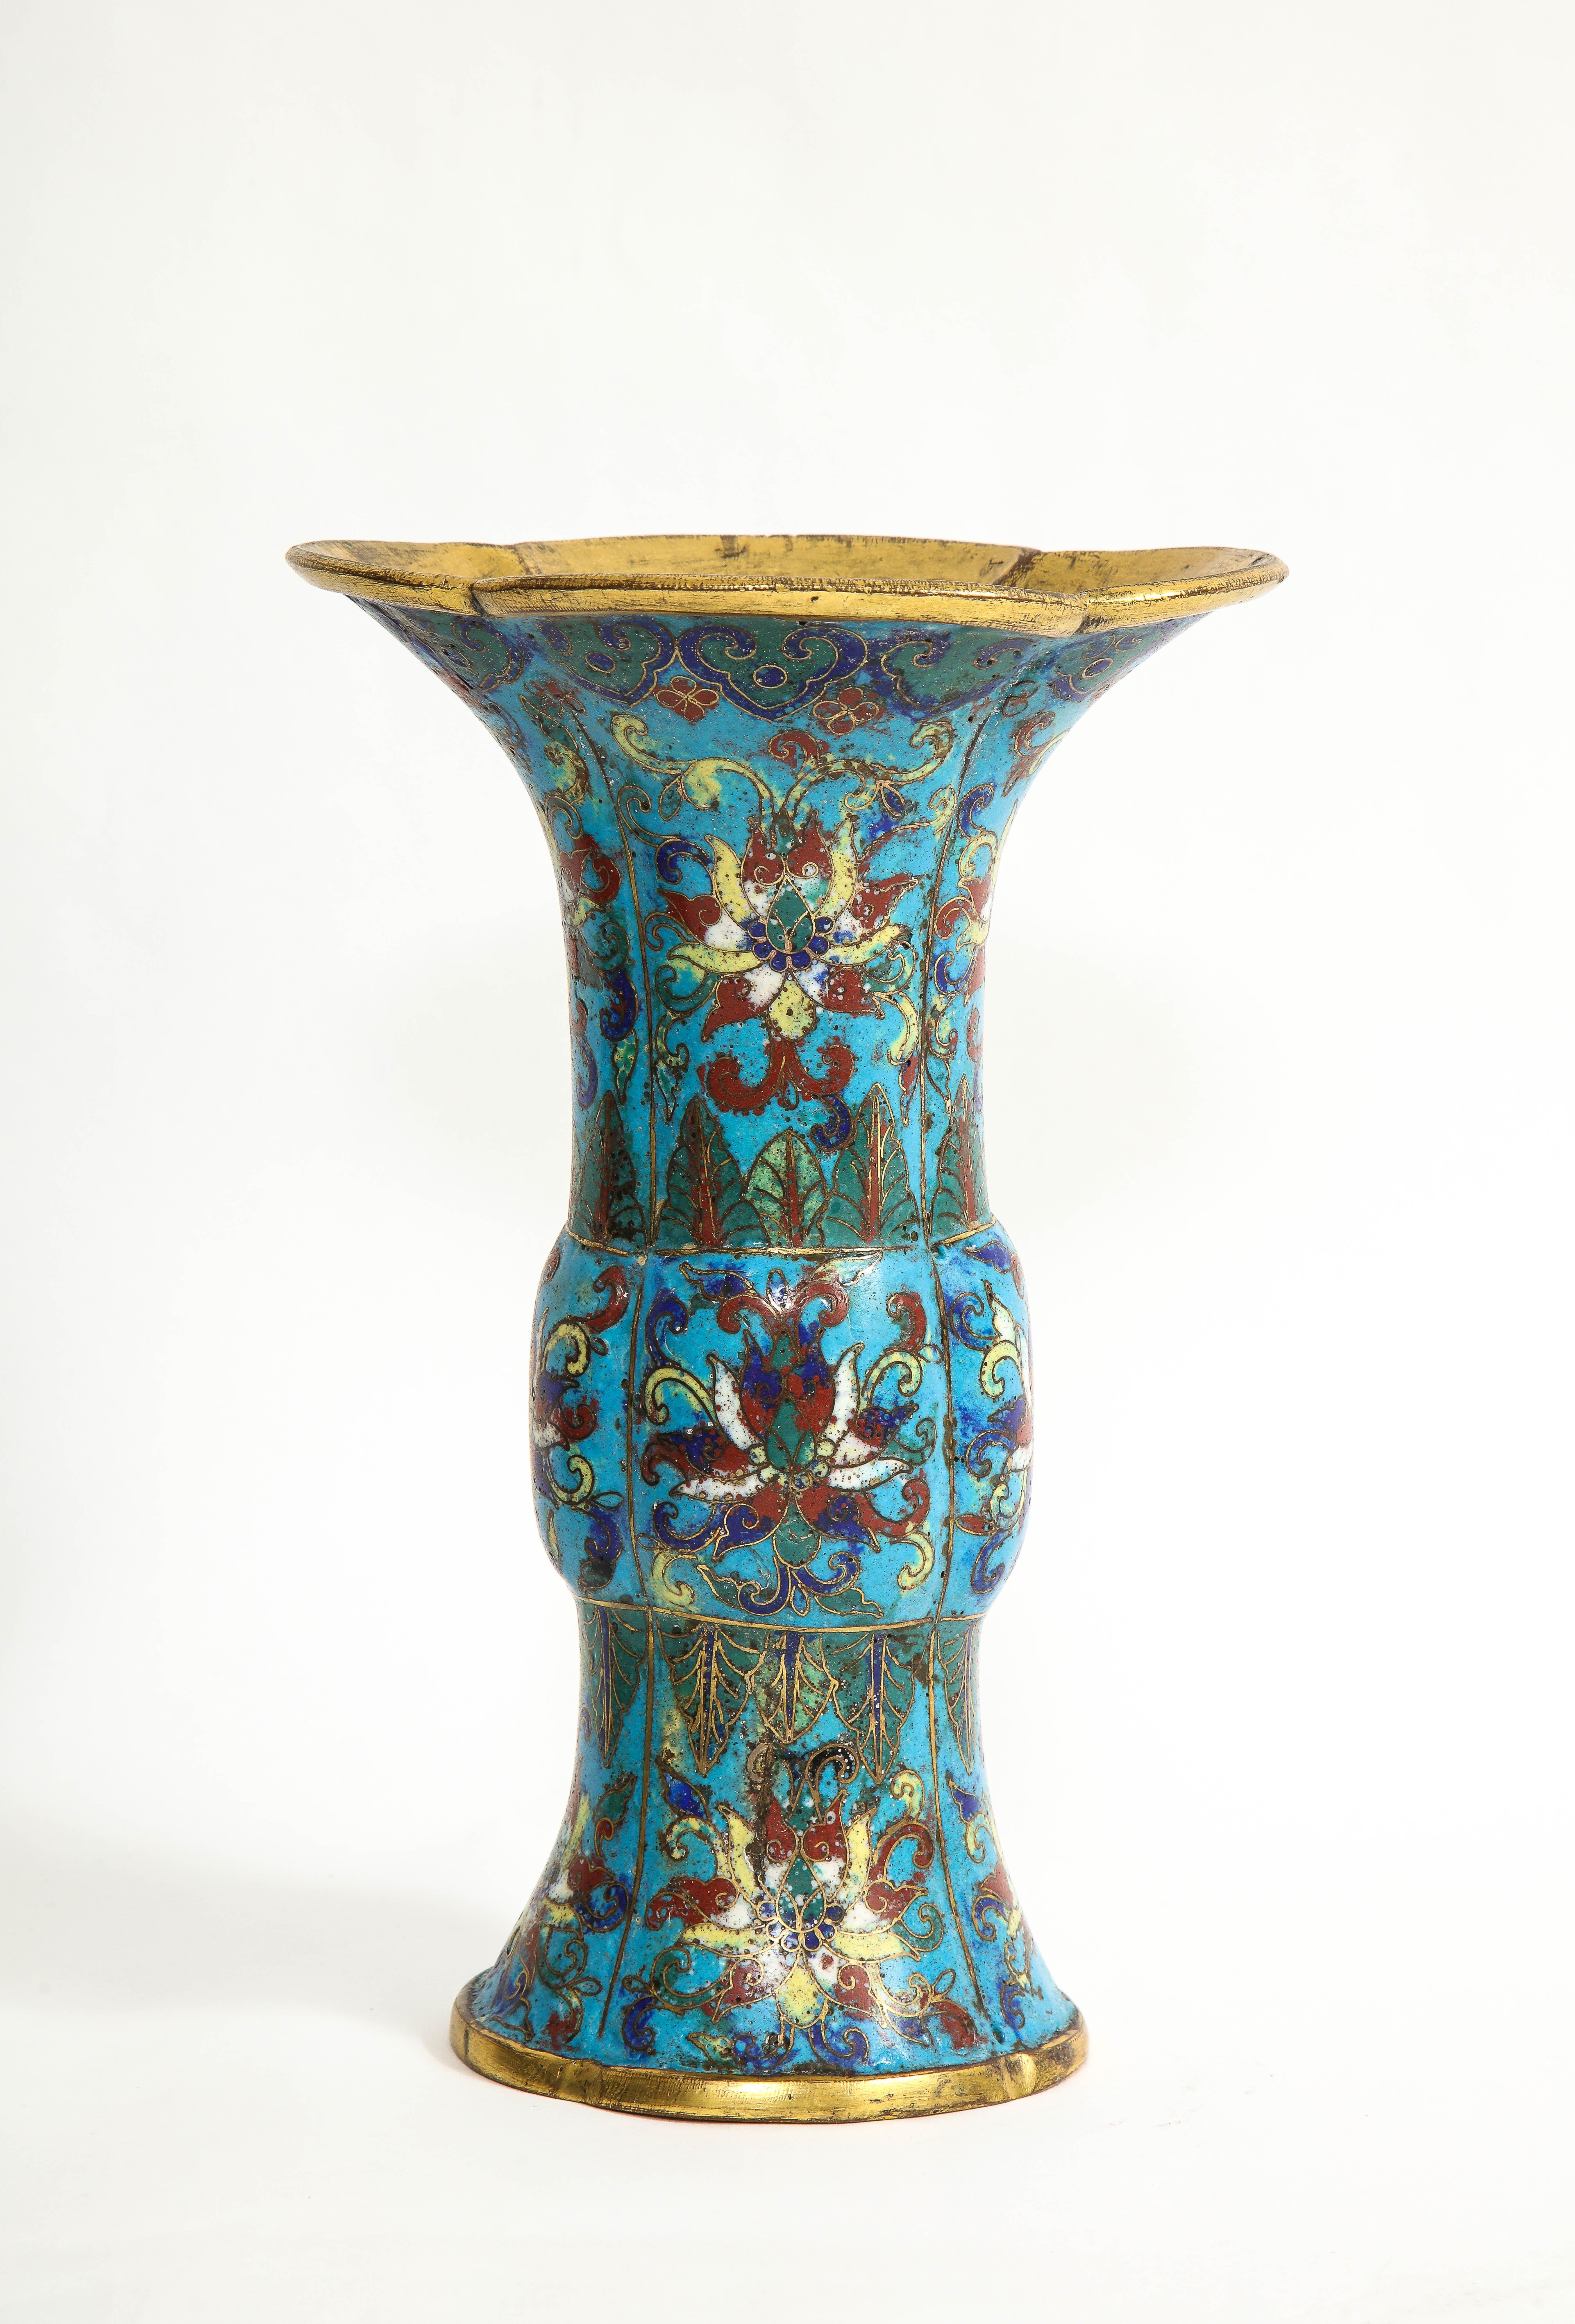 Antique Chinese Cloisonné Enamel Gu Form Vase, 17th/18th Century, Kangxi Period In Good Condition For Sale In New York, NY